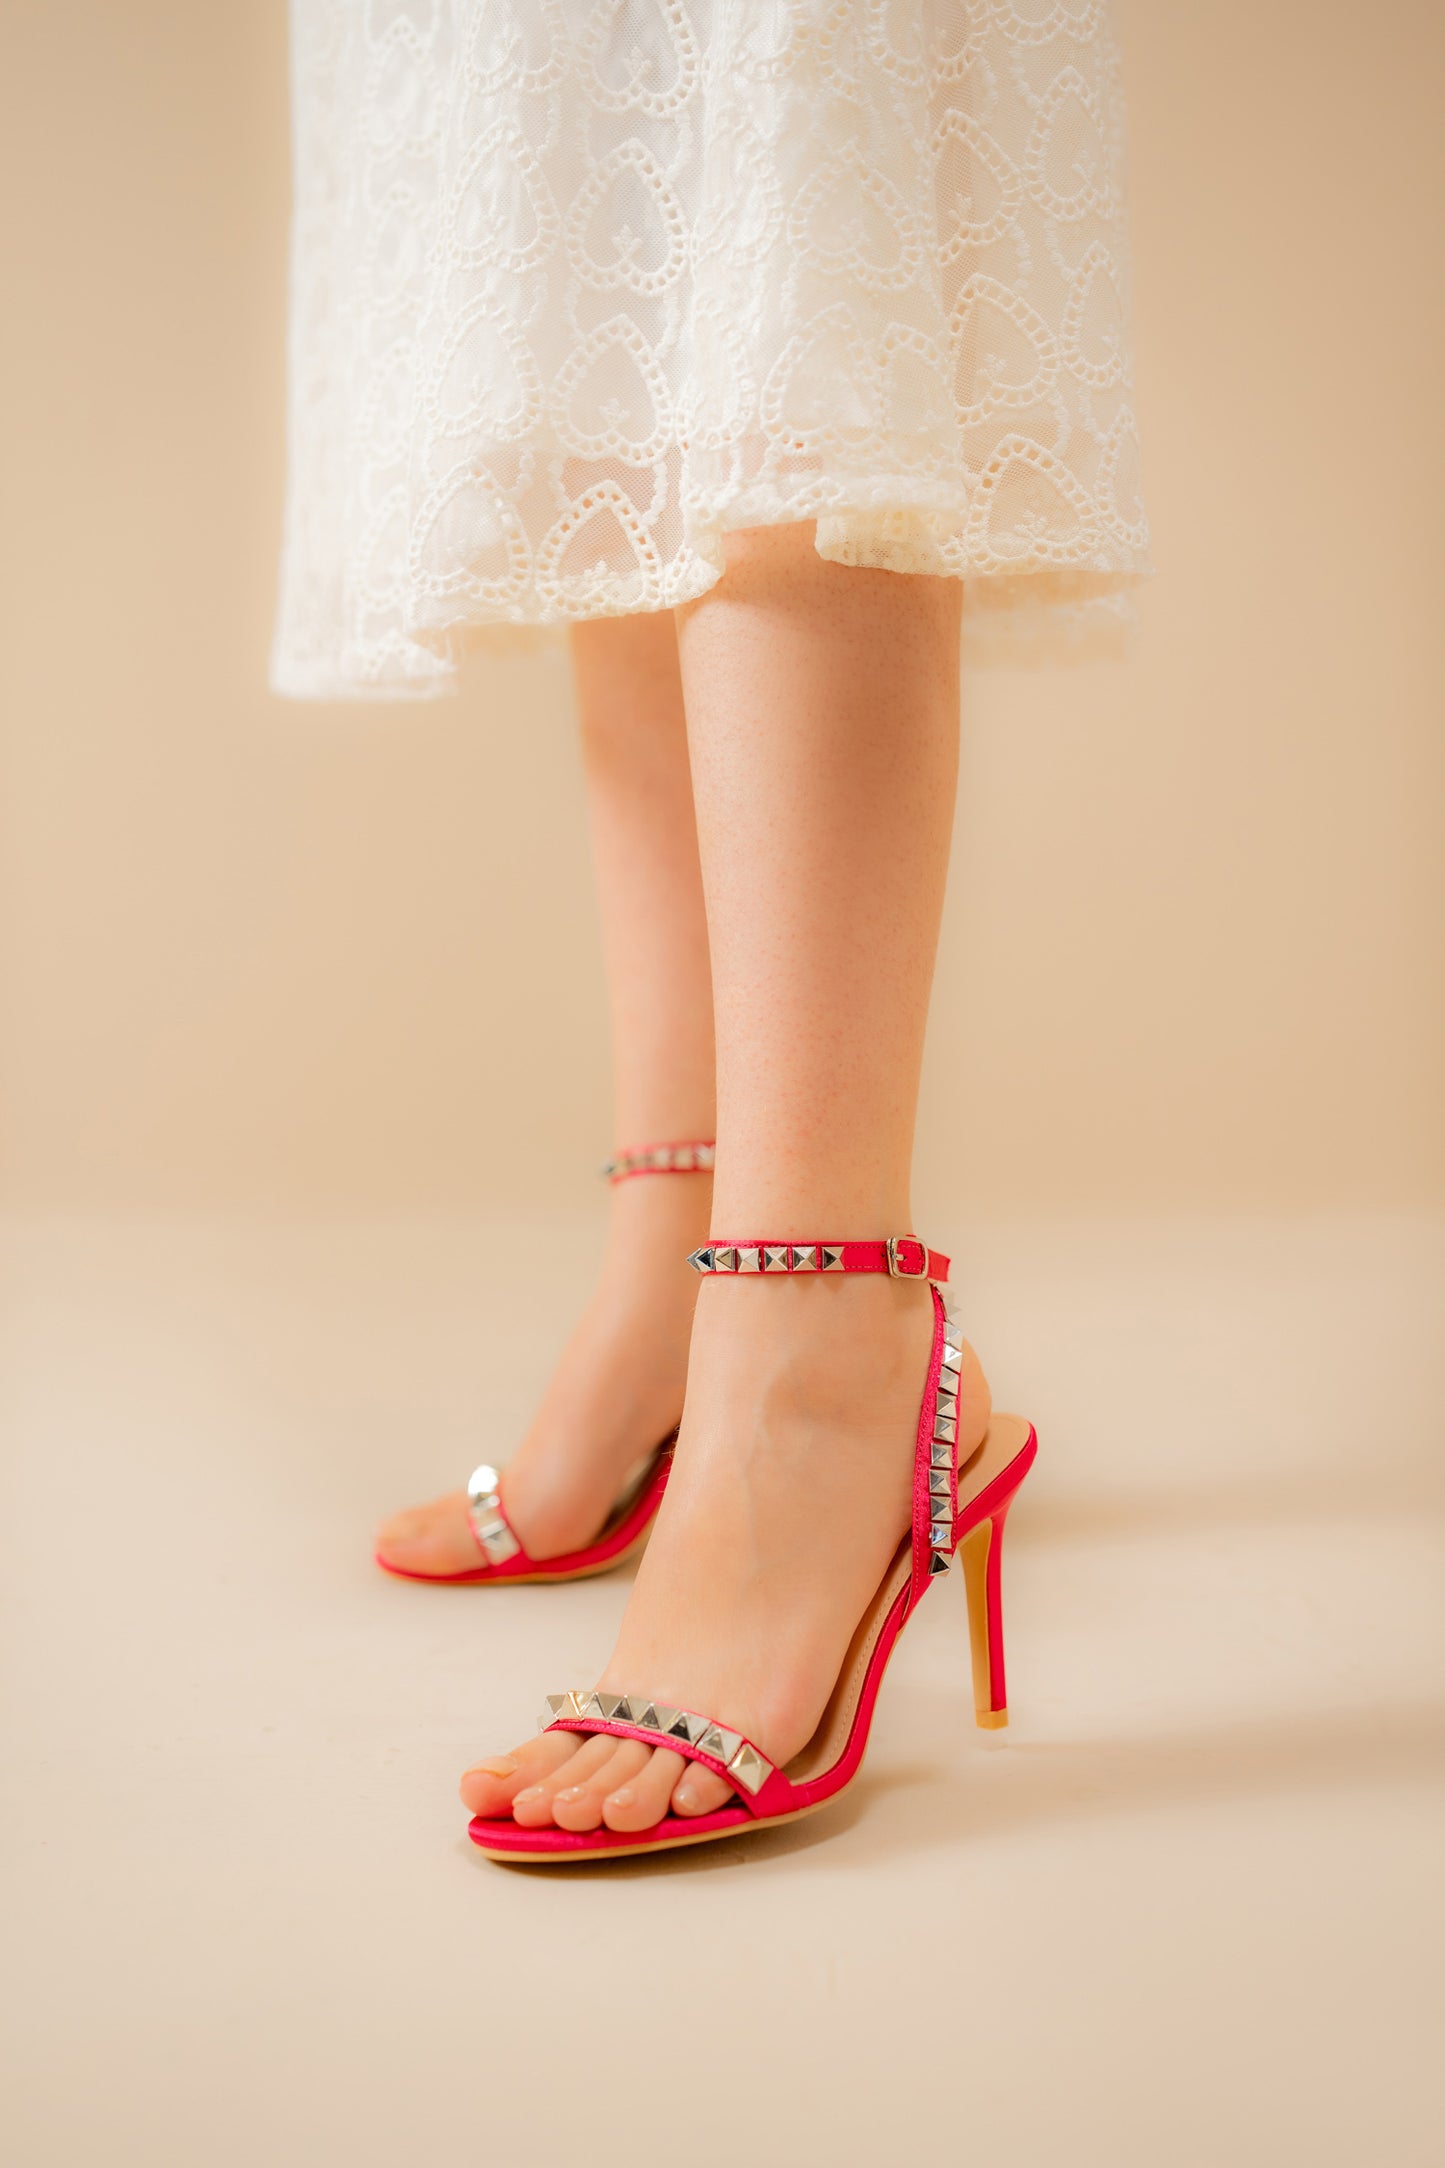 Ankle-cuff studded heels